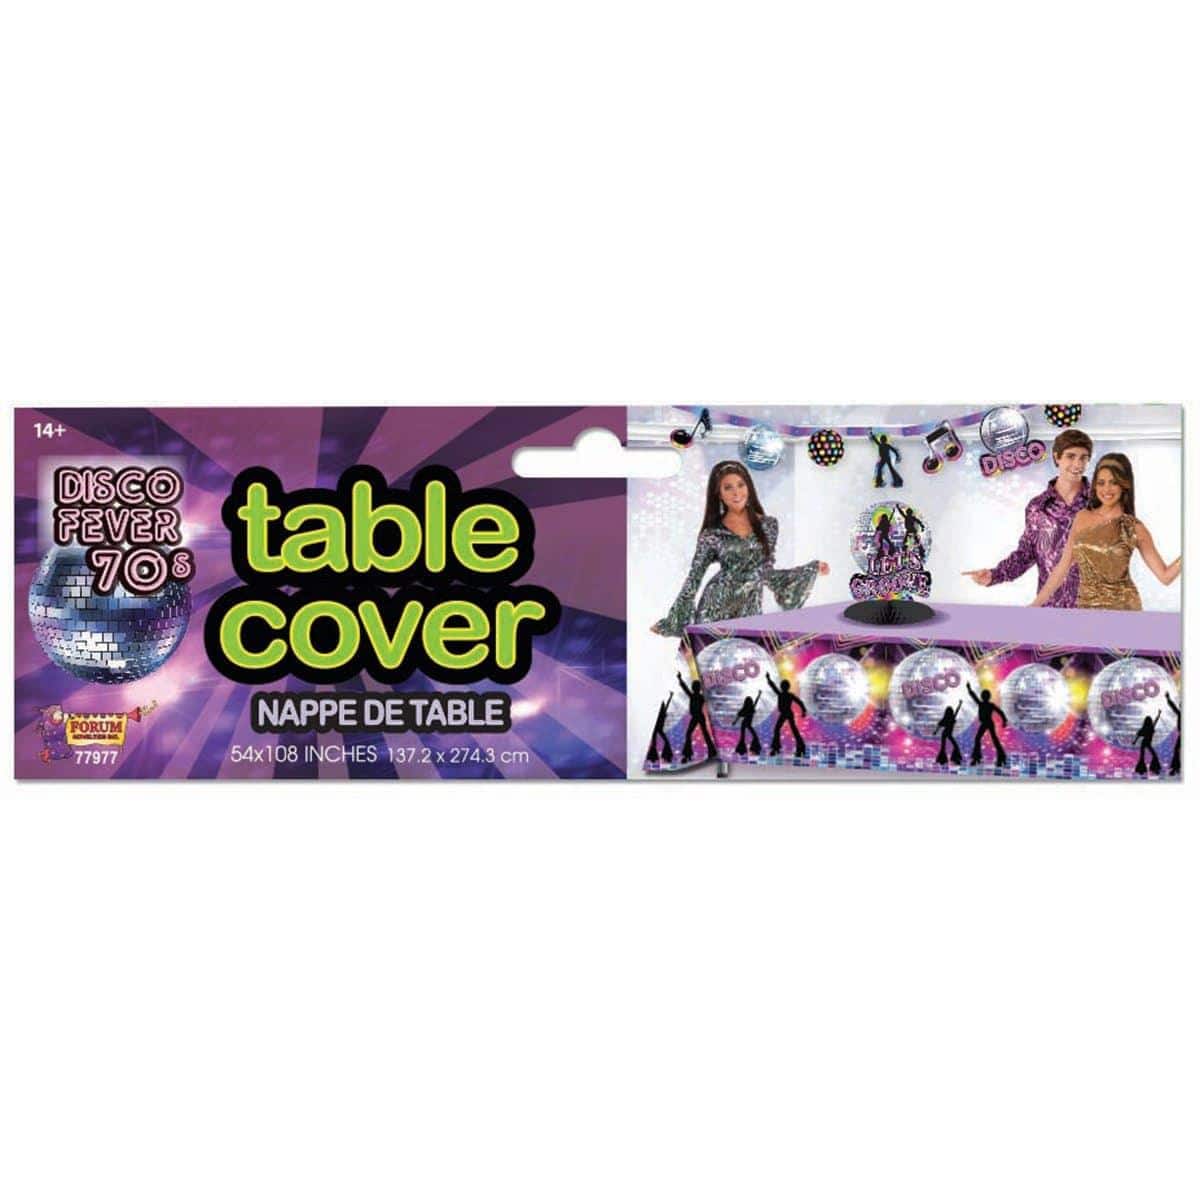 Buy Theme Party Disco Fever Tablecover sold at Party Expert